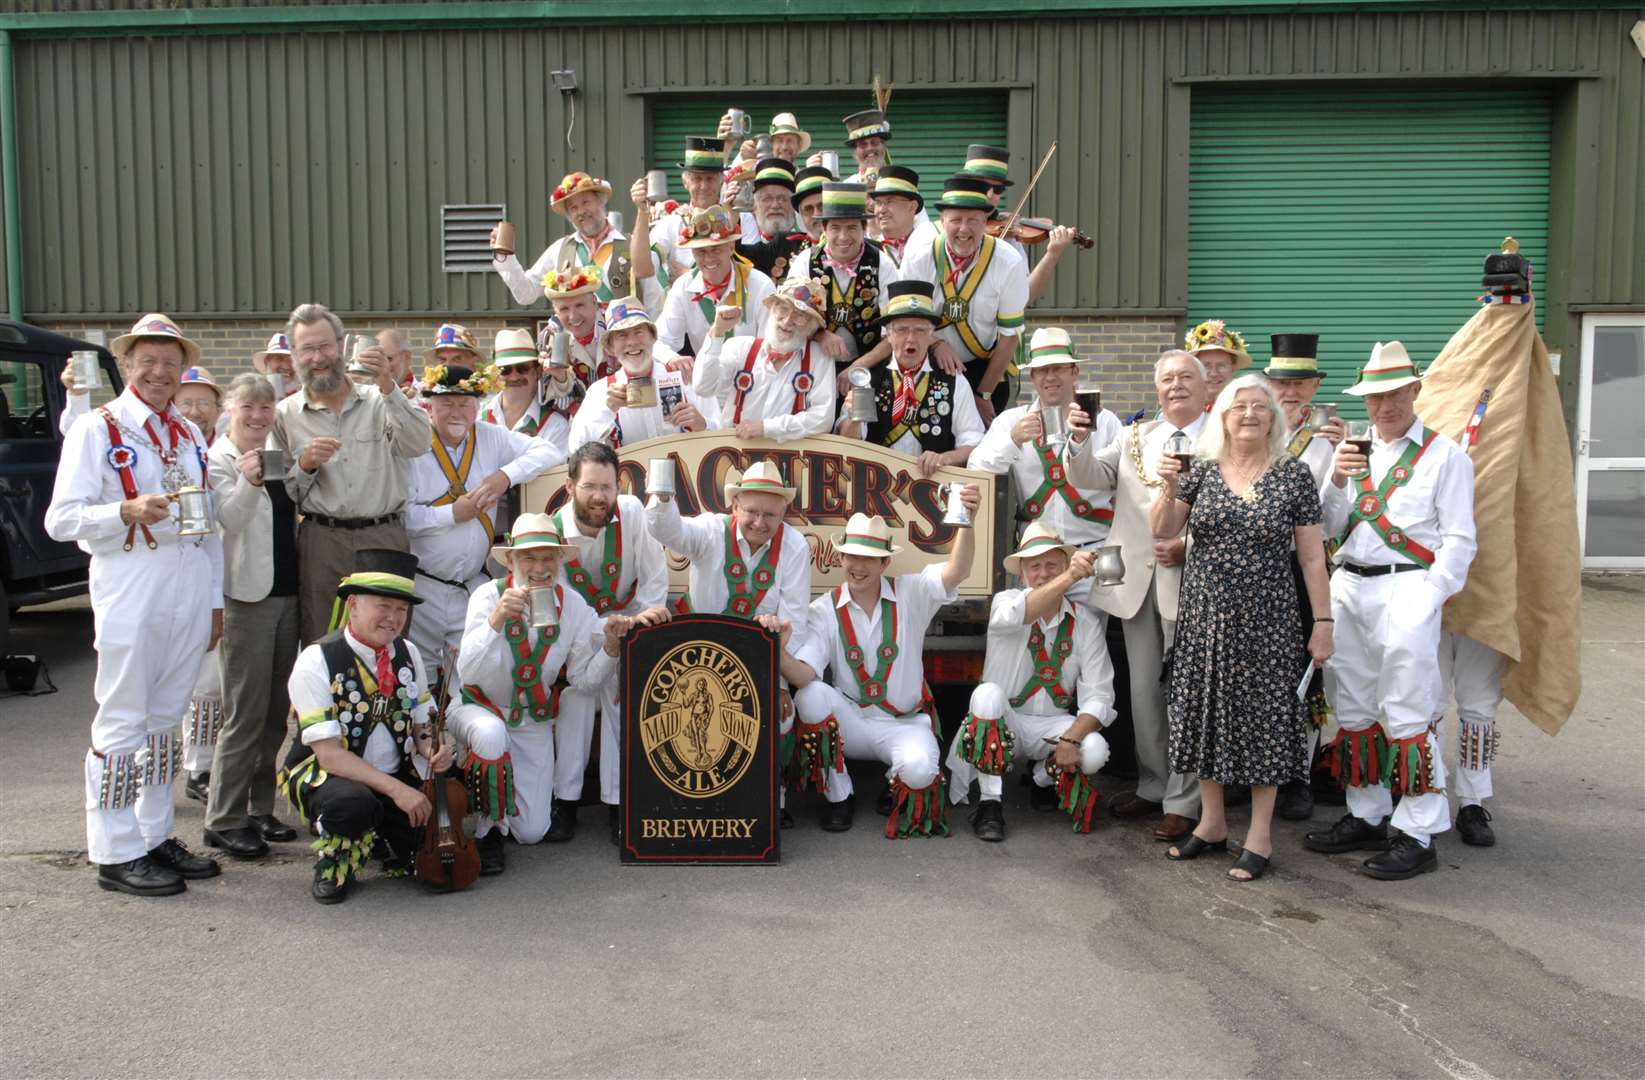 The Hartley Morris Men at Goachers Brewery in Tovil as part of their summer tour 2009